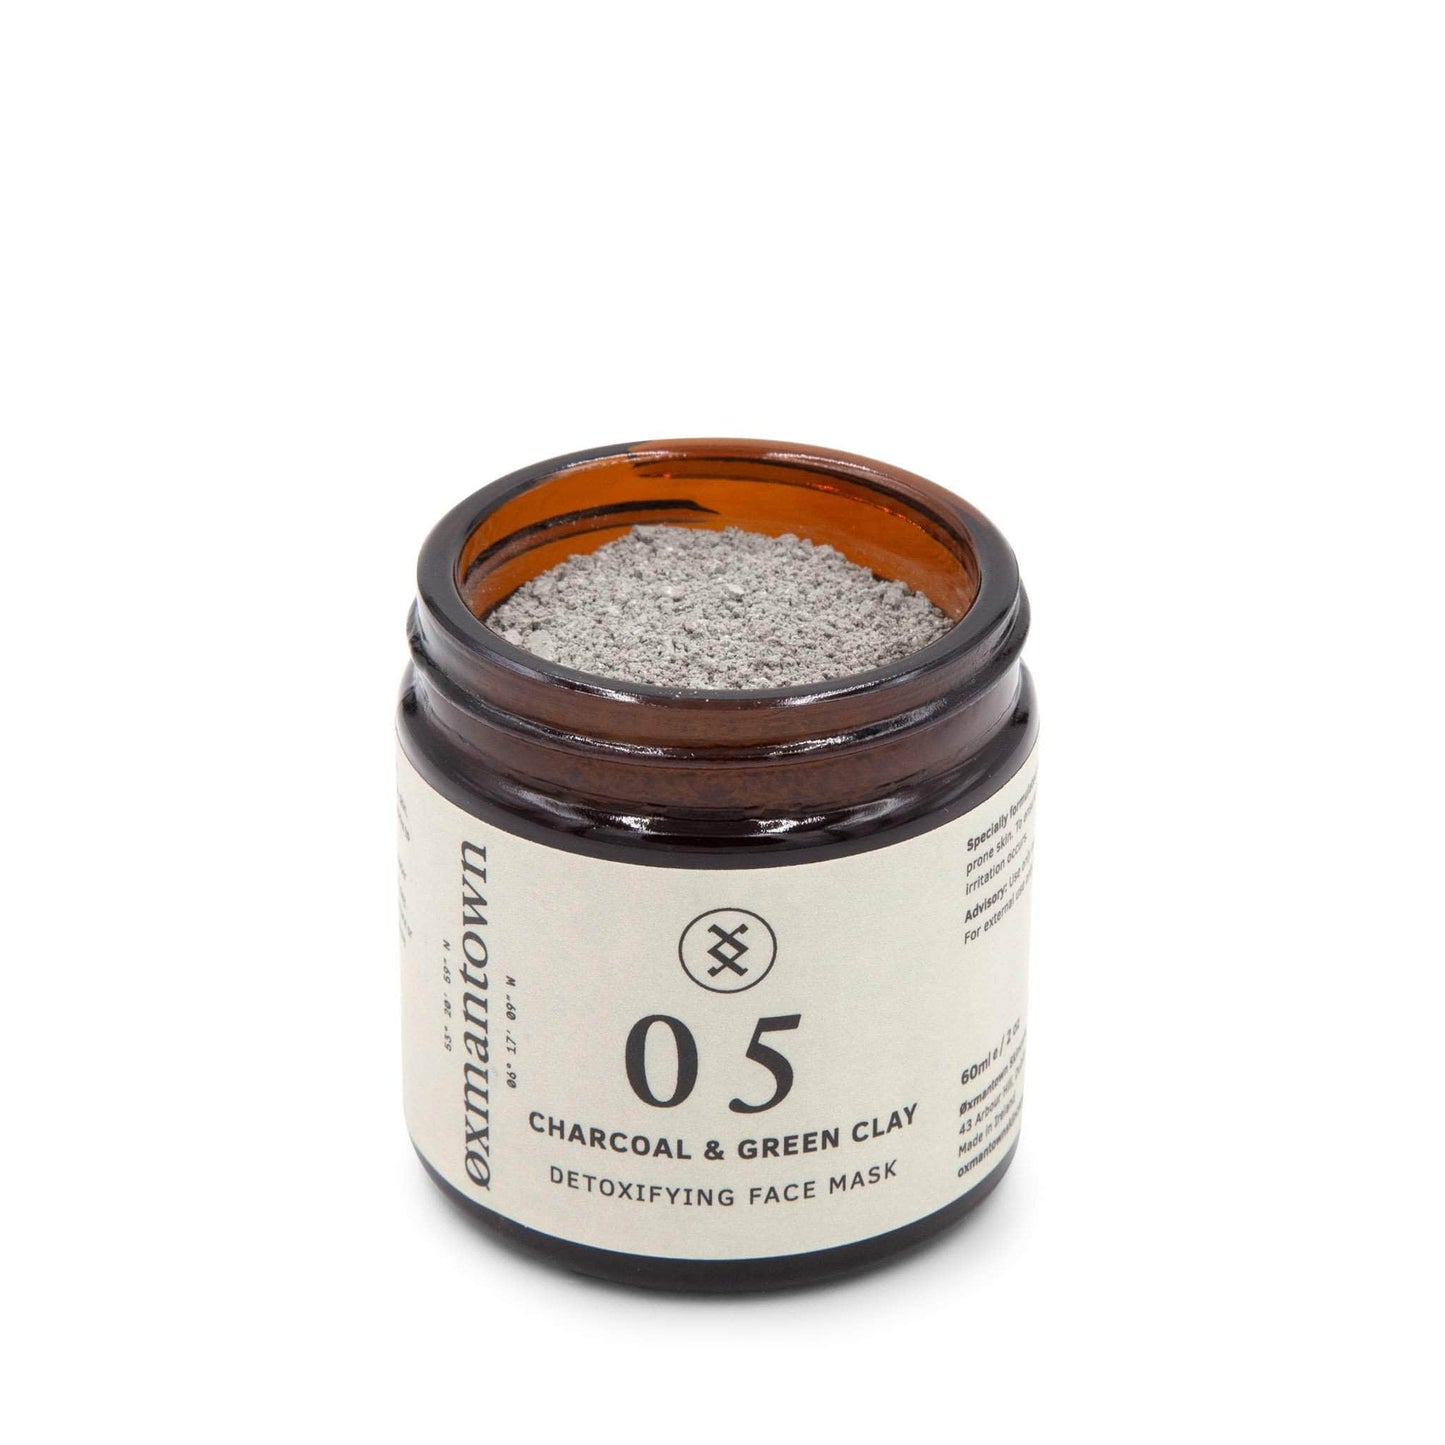 Oxmantown Skincare 05 Charcoal & Green Clay Detoxifying Face Mask 60ml